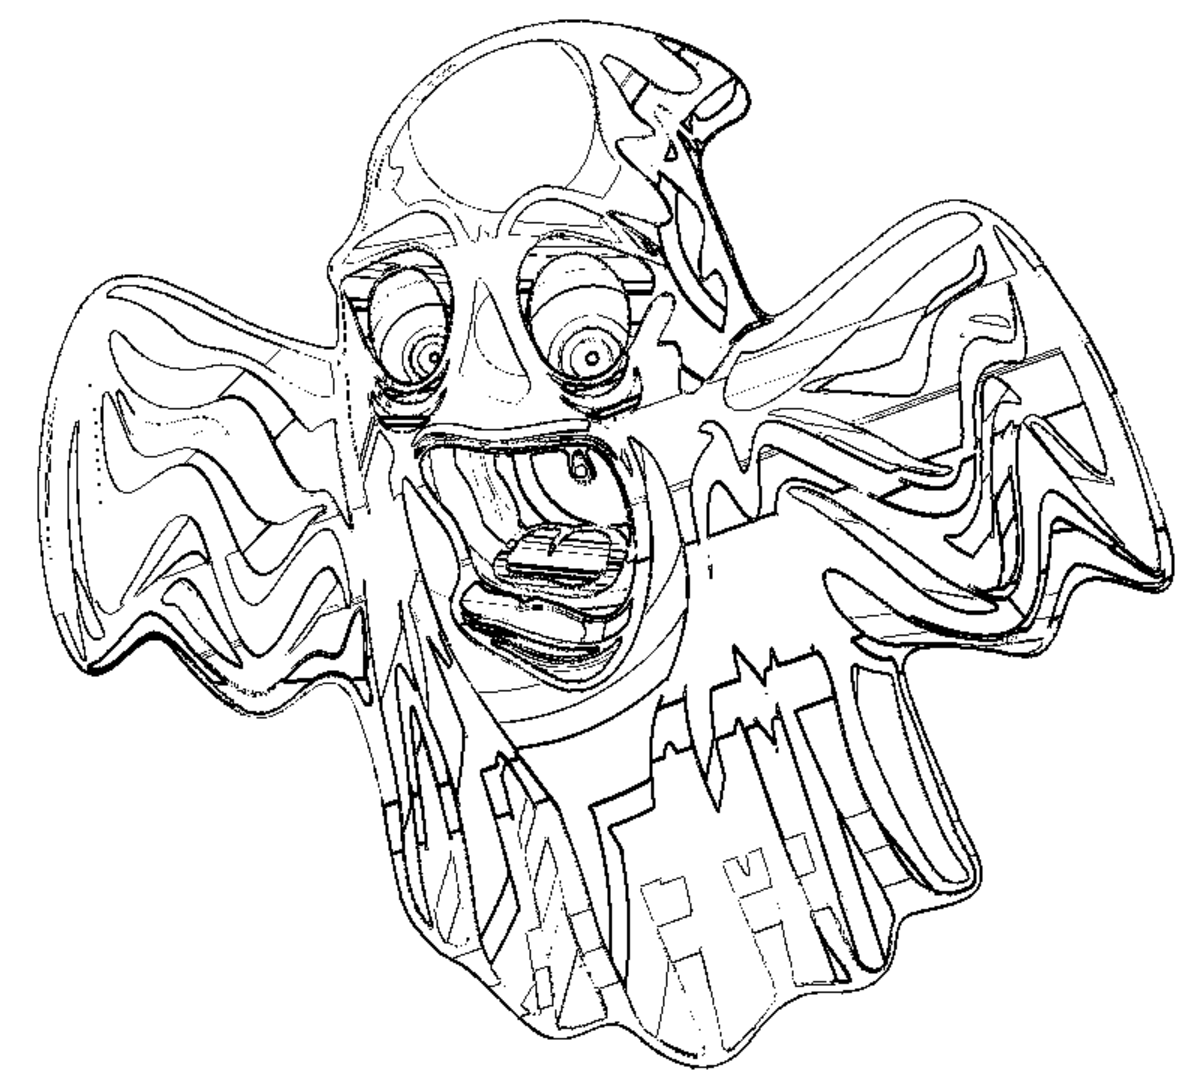 Edge drawing from a ghost image with a transparent background